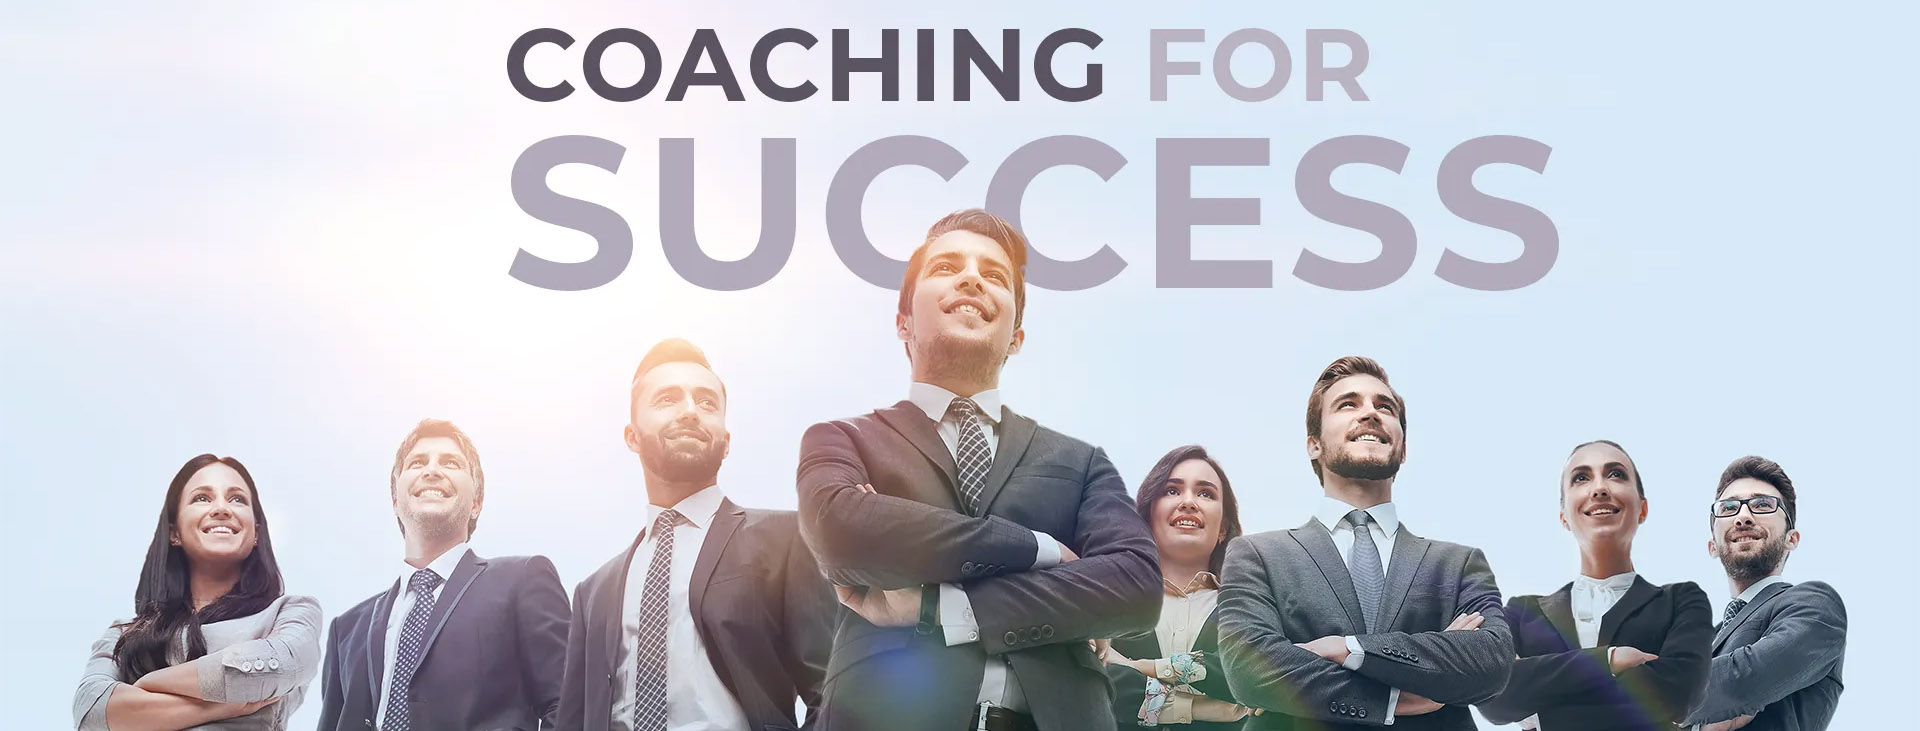 Mentoring Matters - The Power of Coaching: How Business Coaching Transforms Teams at Every Level